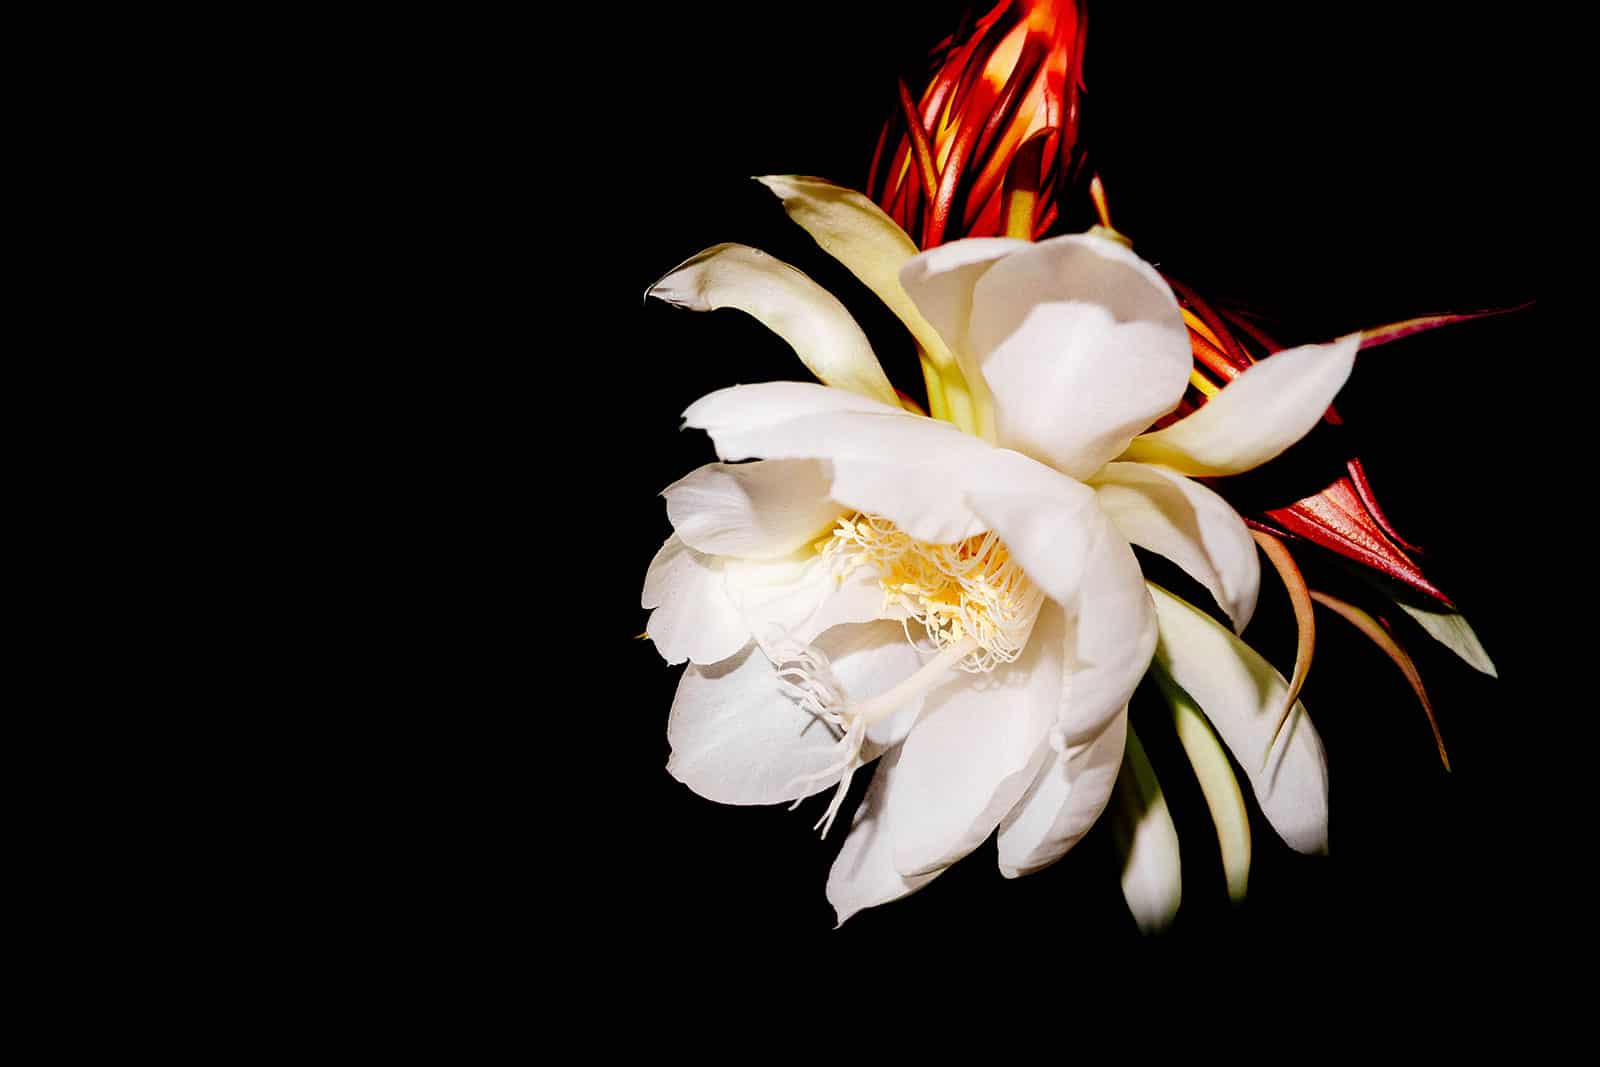 Close-up of dramatic white flower from a fishbone cactus plant shot against a black backdrop